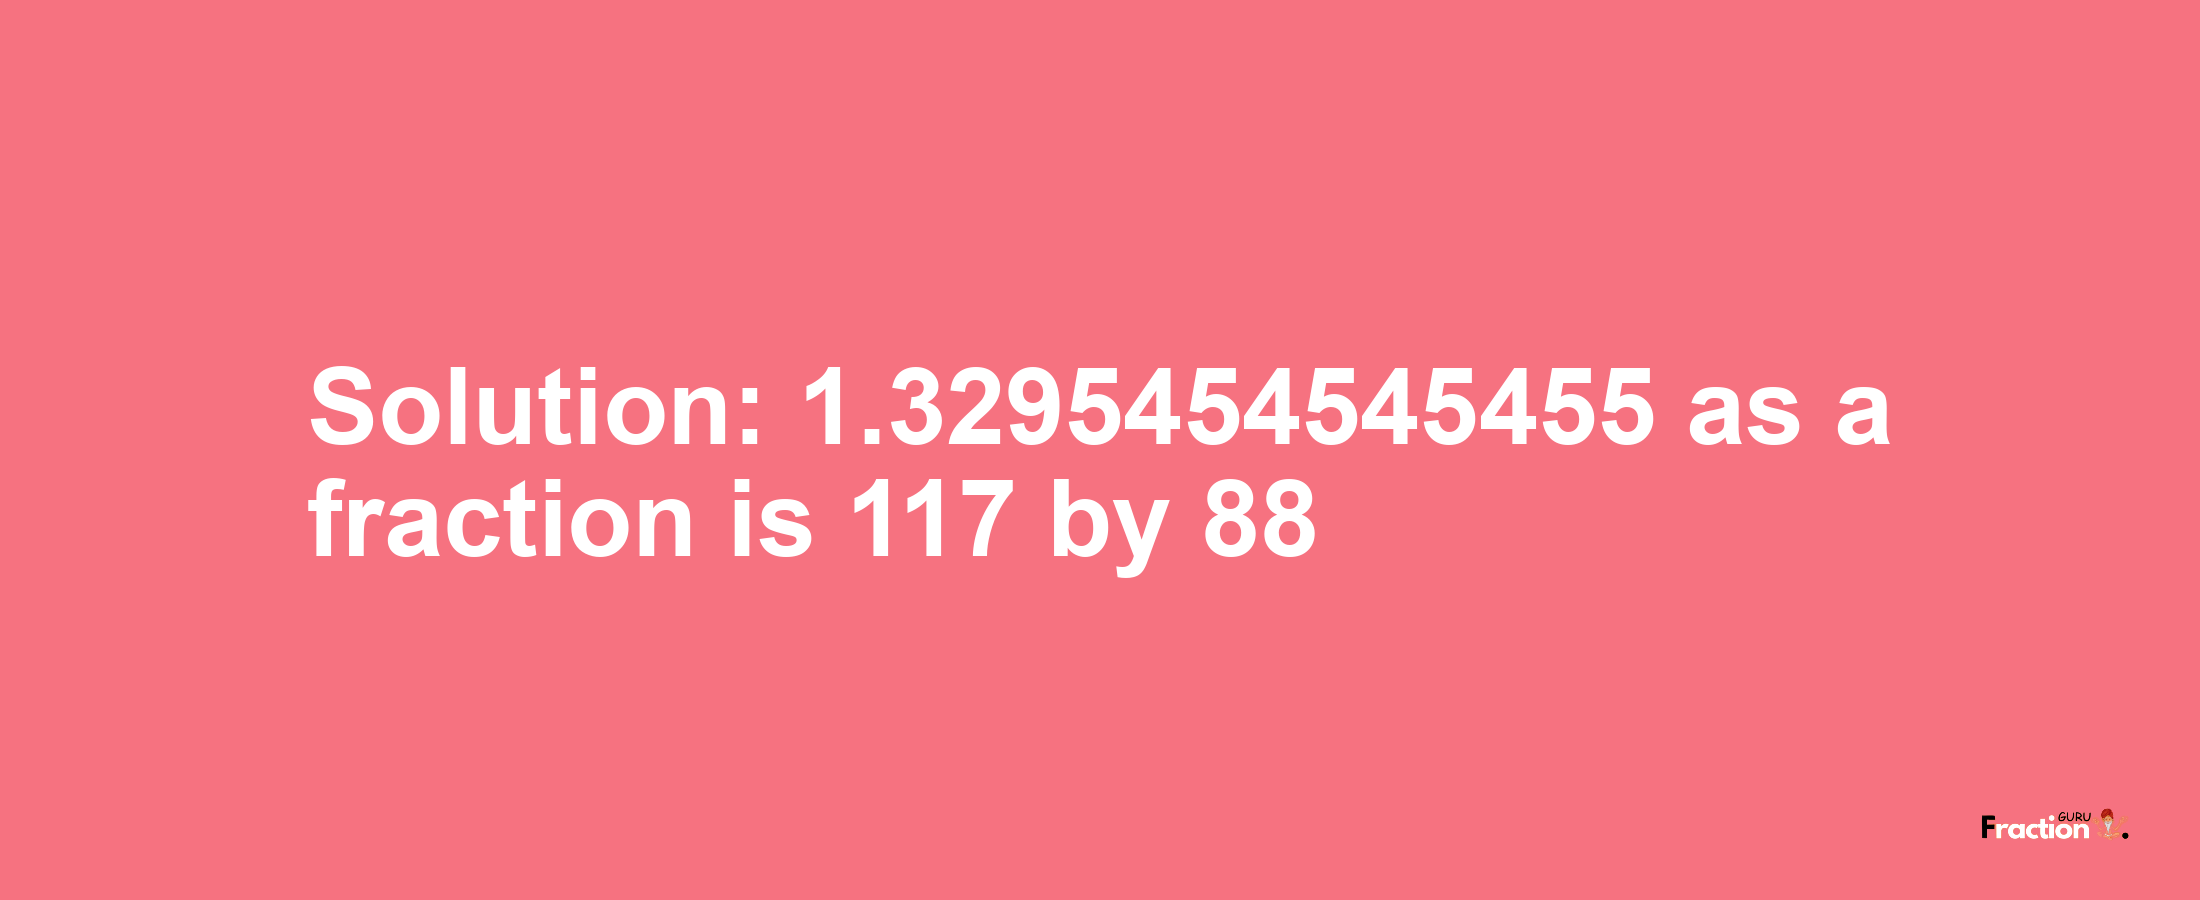 Solution:1.3295454545455 as a fraction is 117/88